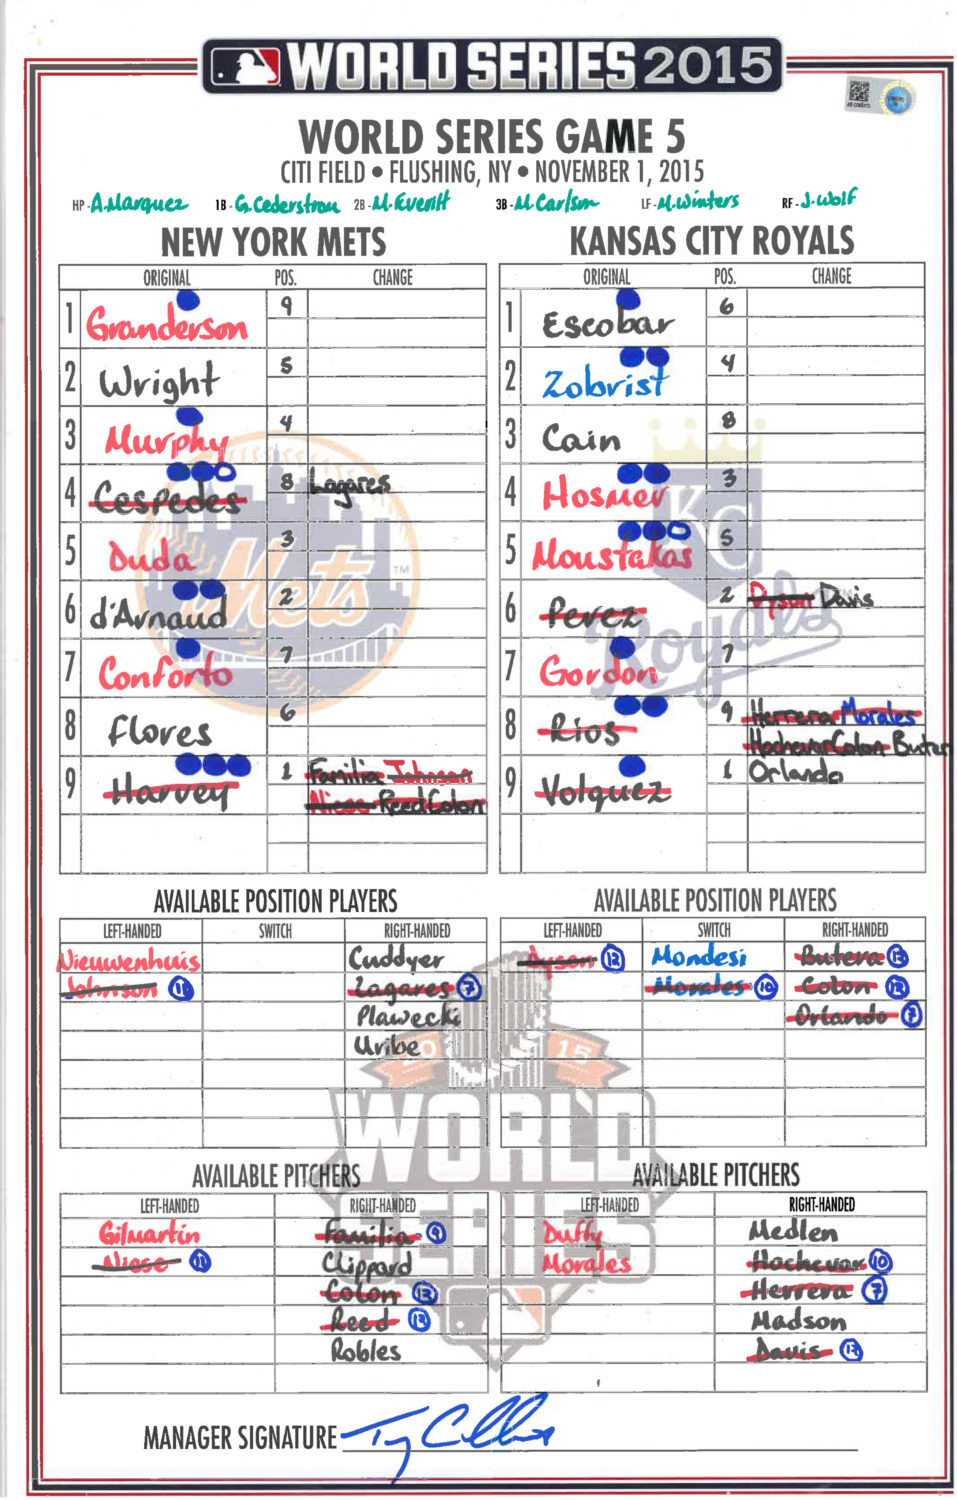 Lineup Card: Game 5 of the 2015 World Series